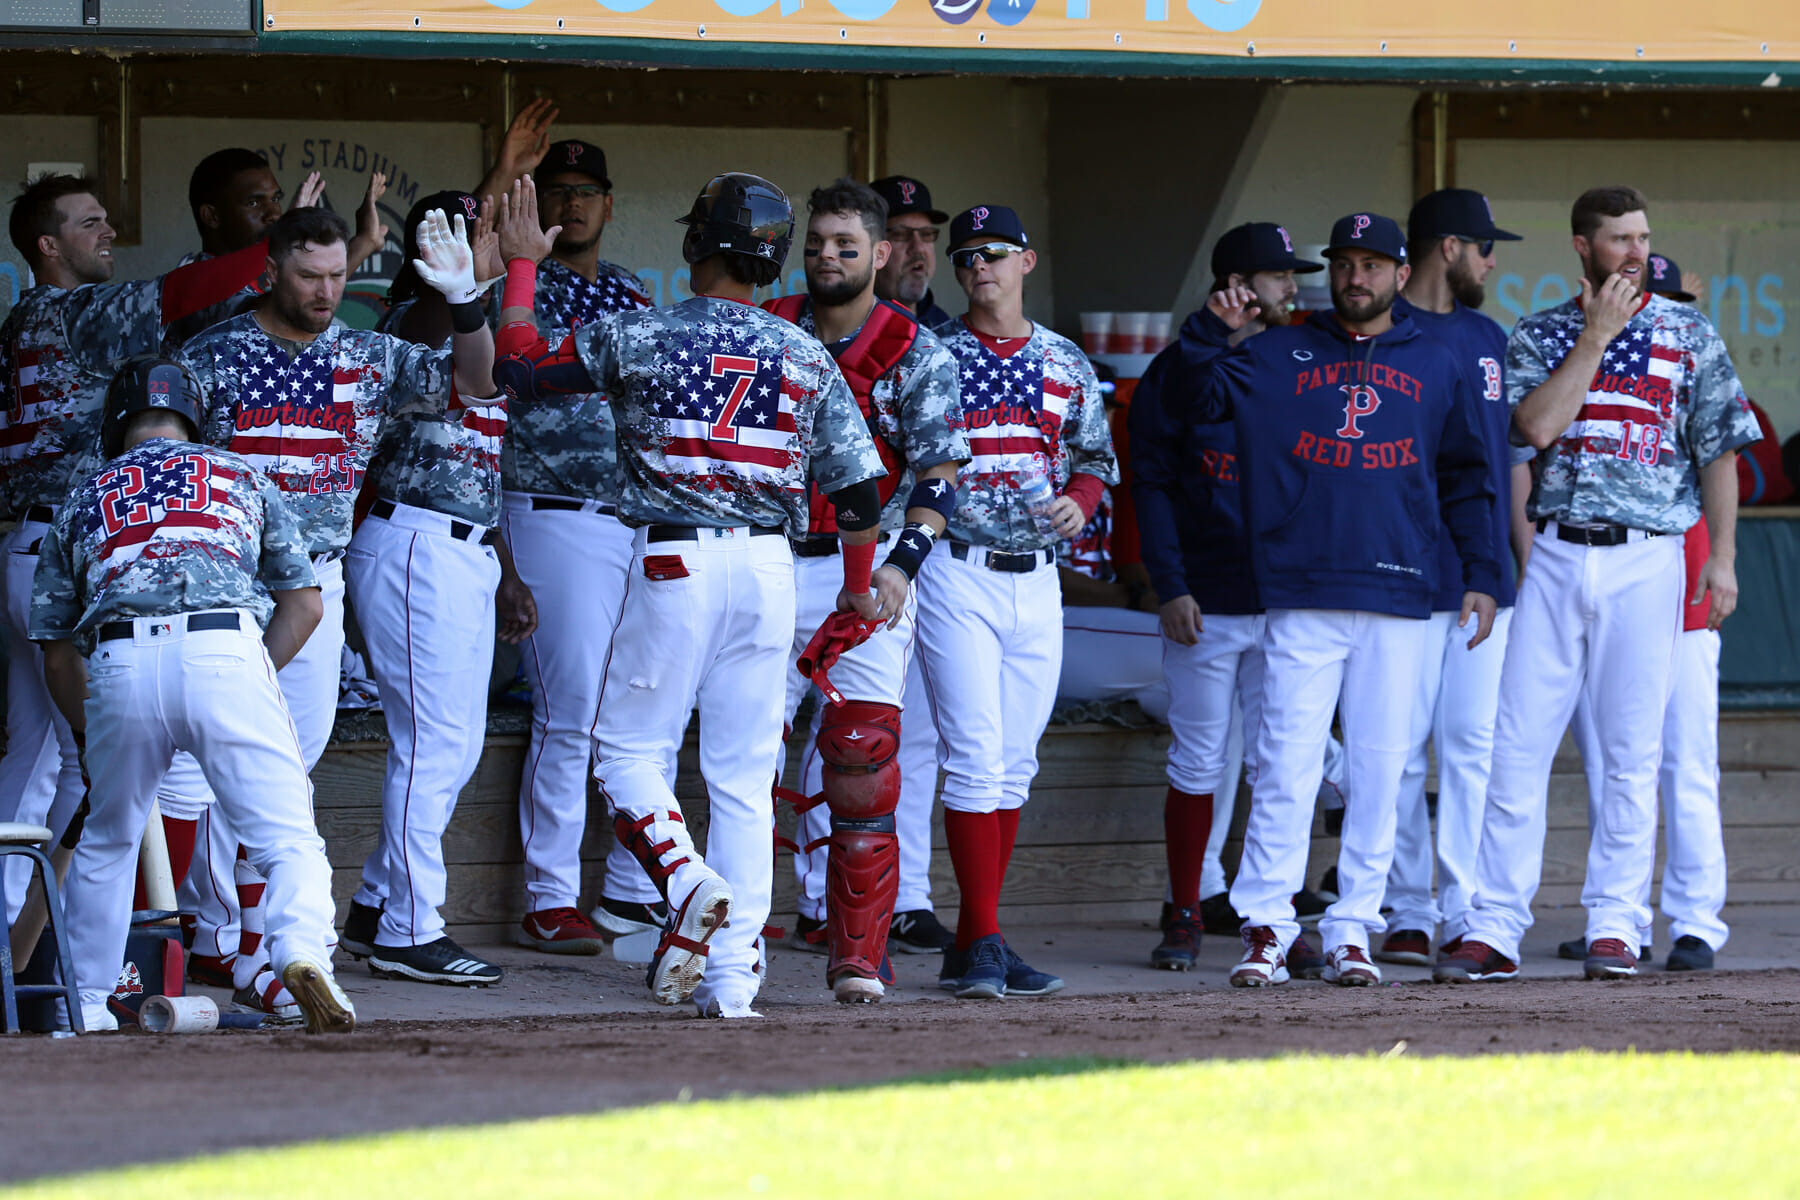 Putting a Bow on the 2019 Pawsox